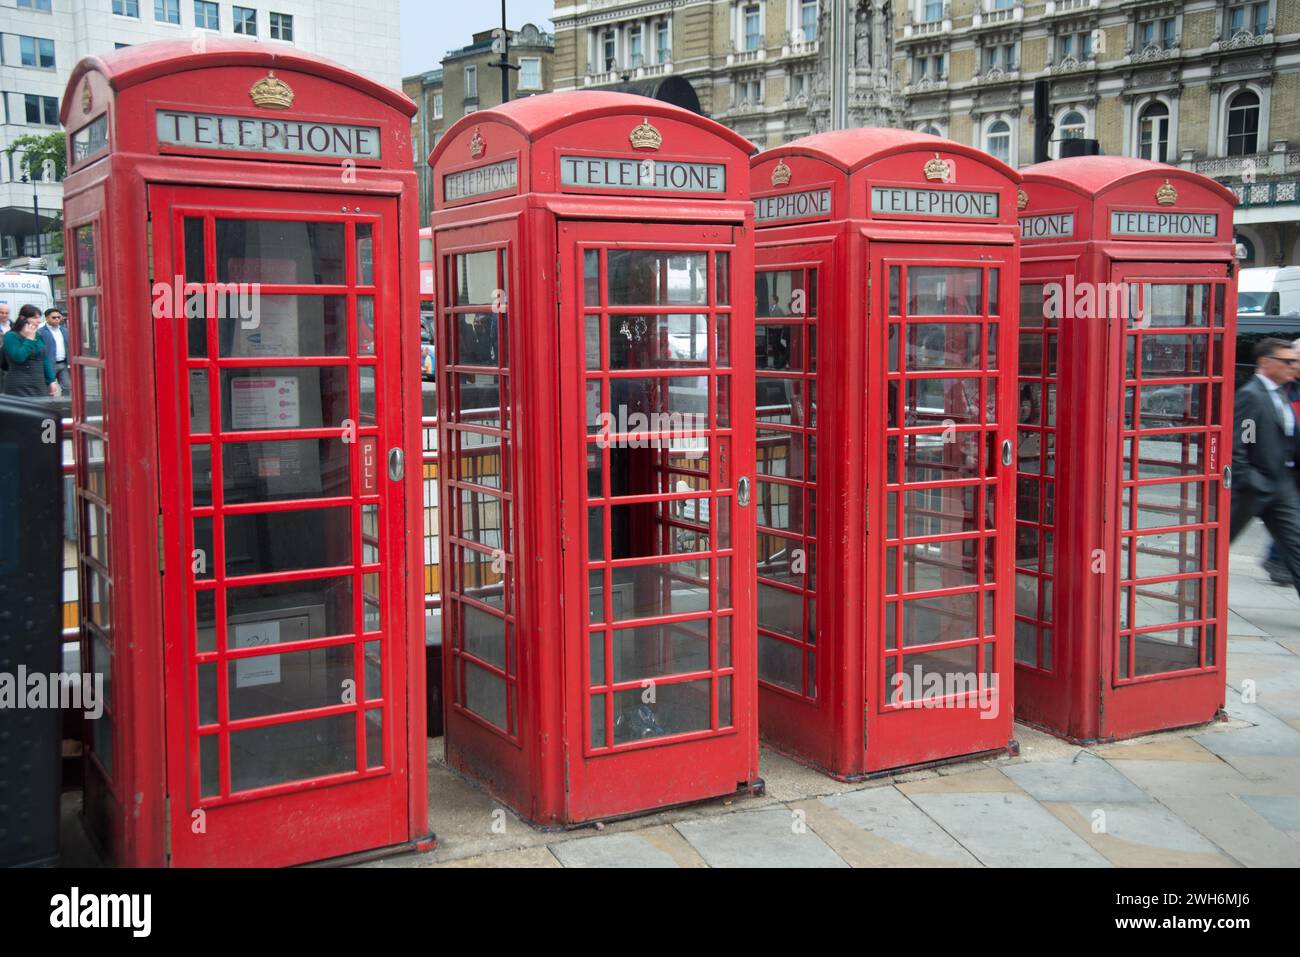 A row of four red telephone boxes on The Strand at Charing Cross, London, England Stock Photo